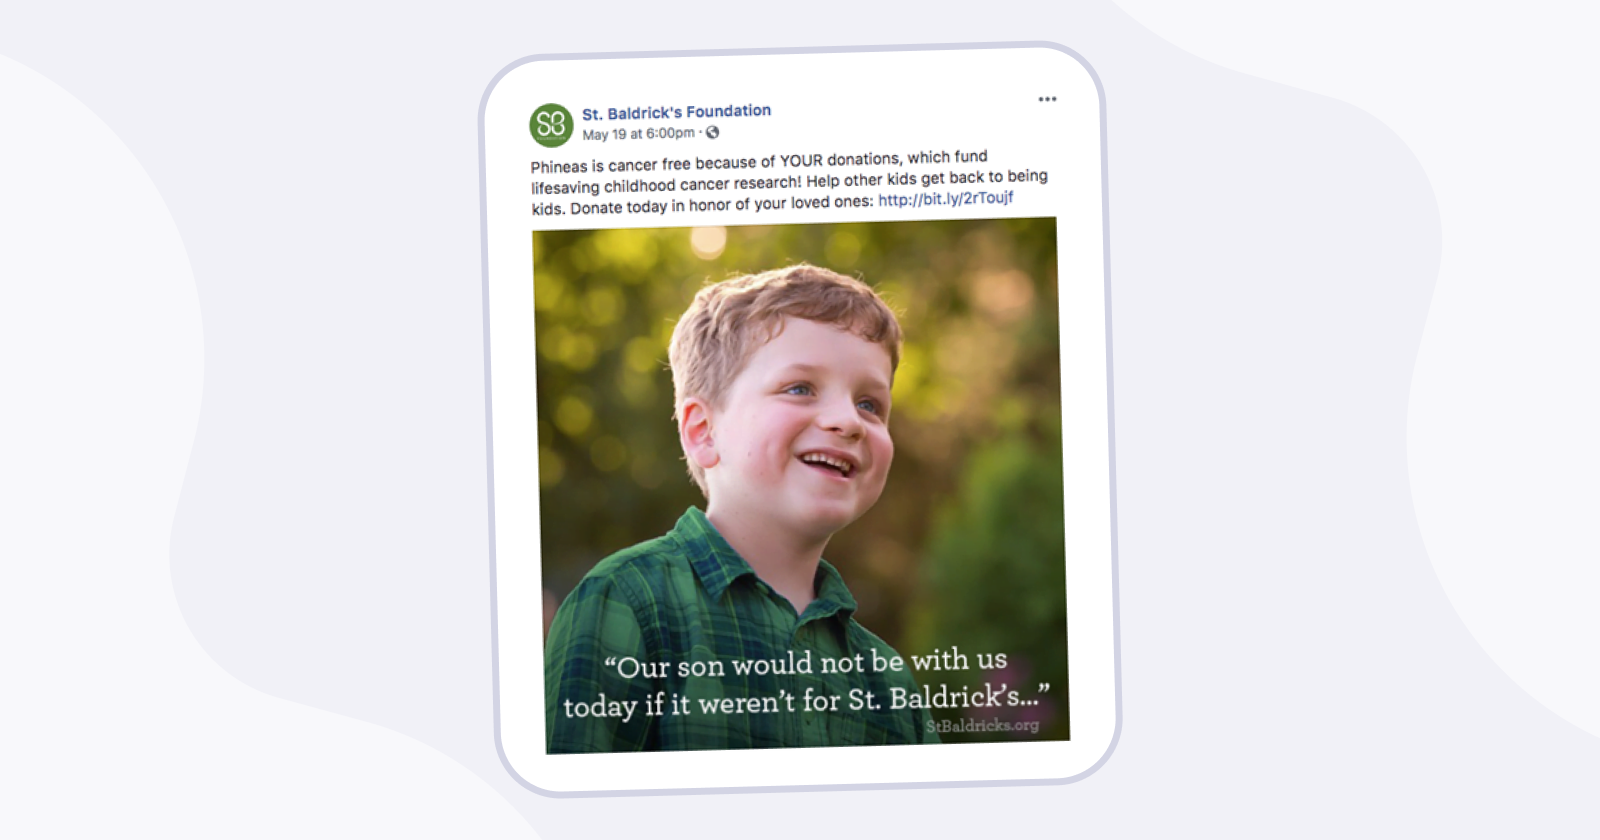 Screenshot of an example ad from St. Baldrick's Foundation.